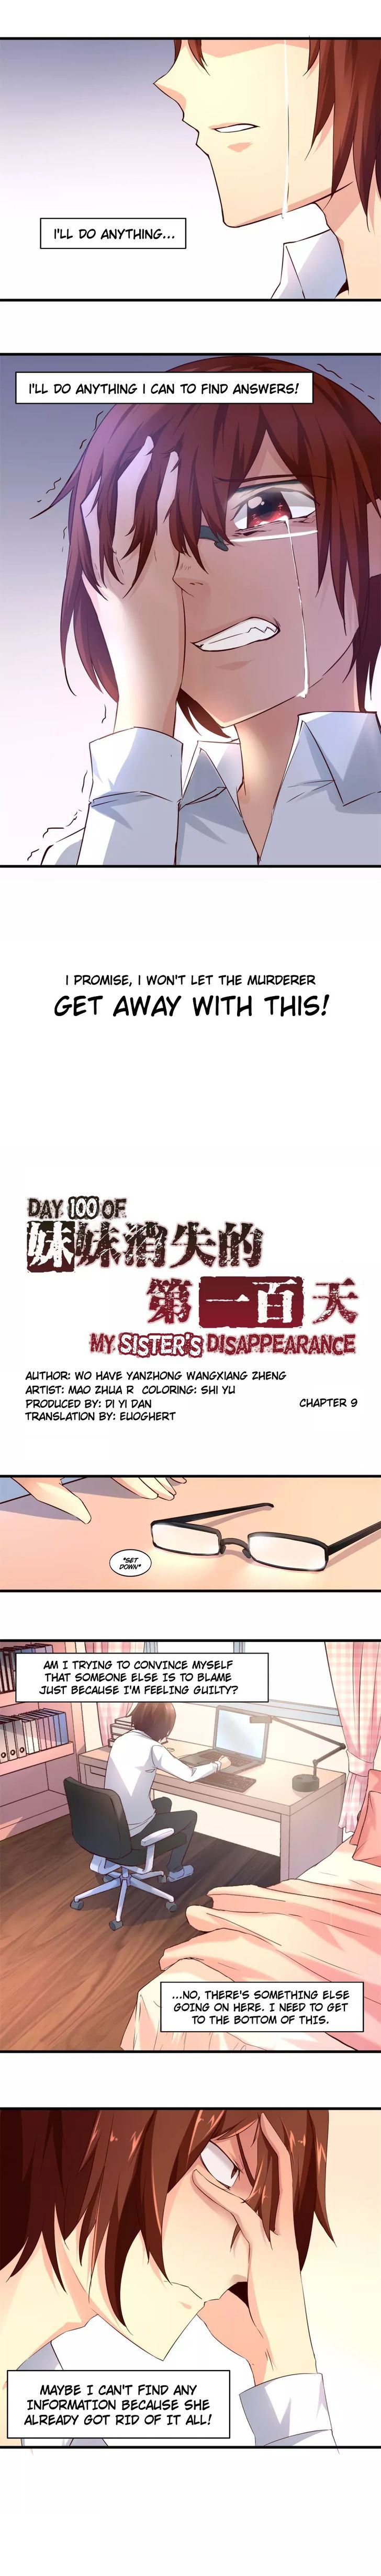 Day 100 of My Sister's Disappearance Chapter 009 page 2